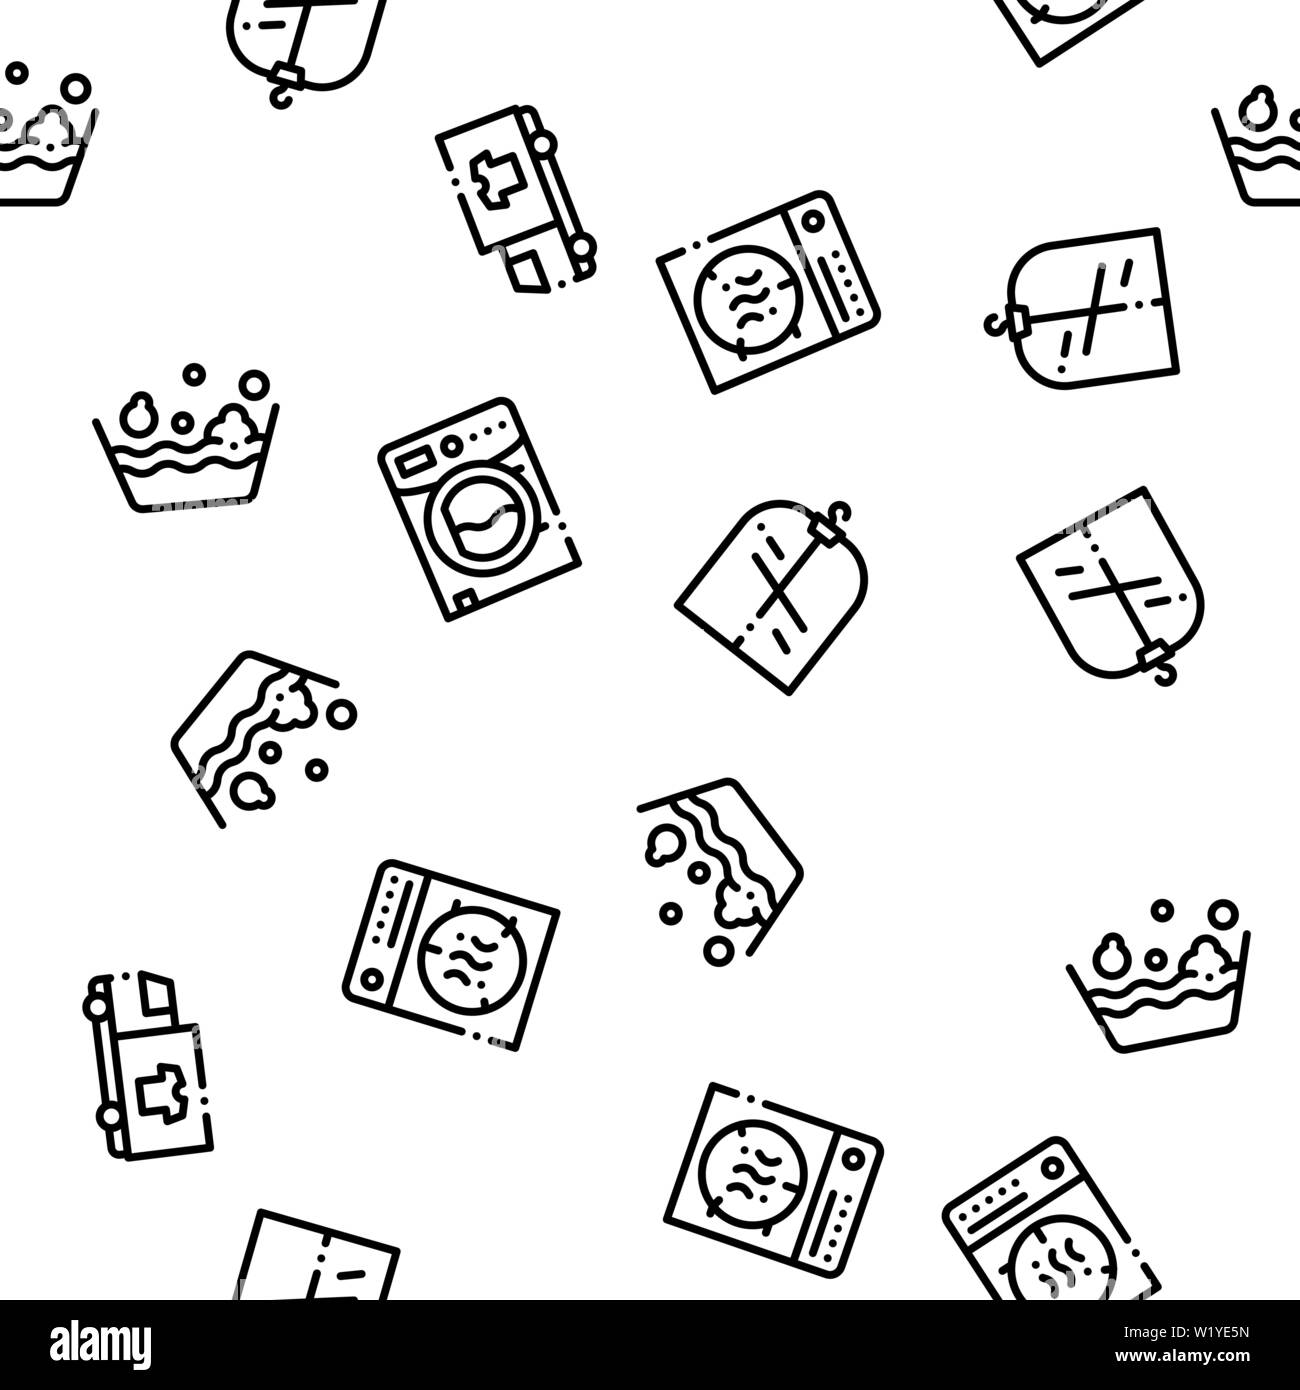 Laundry Service Vector Seamless Pattern Stock Vector